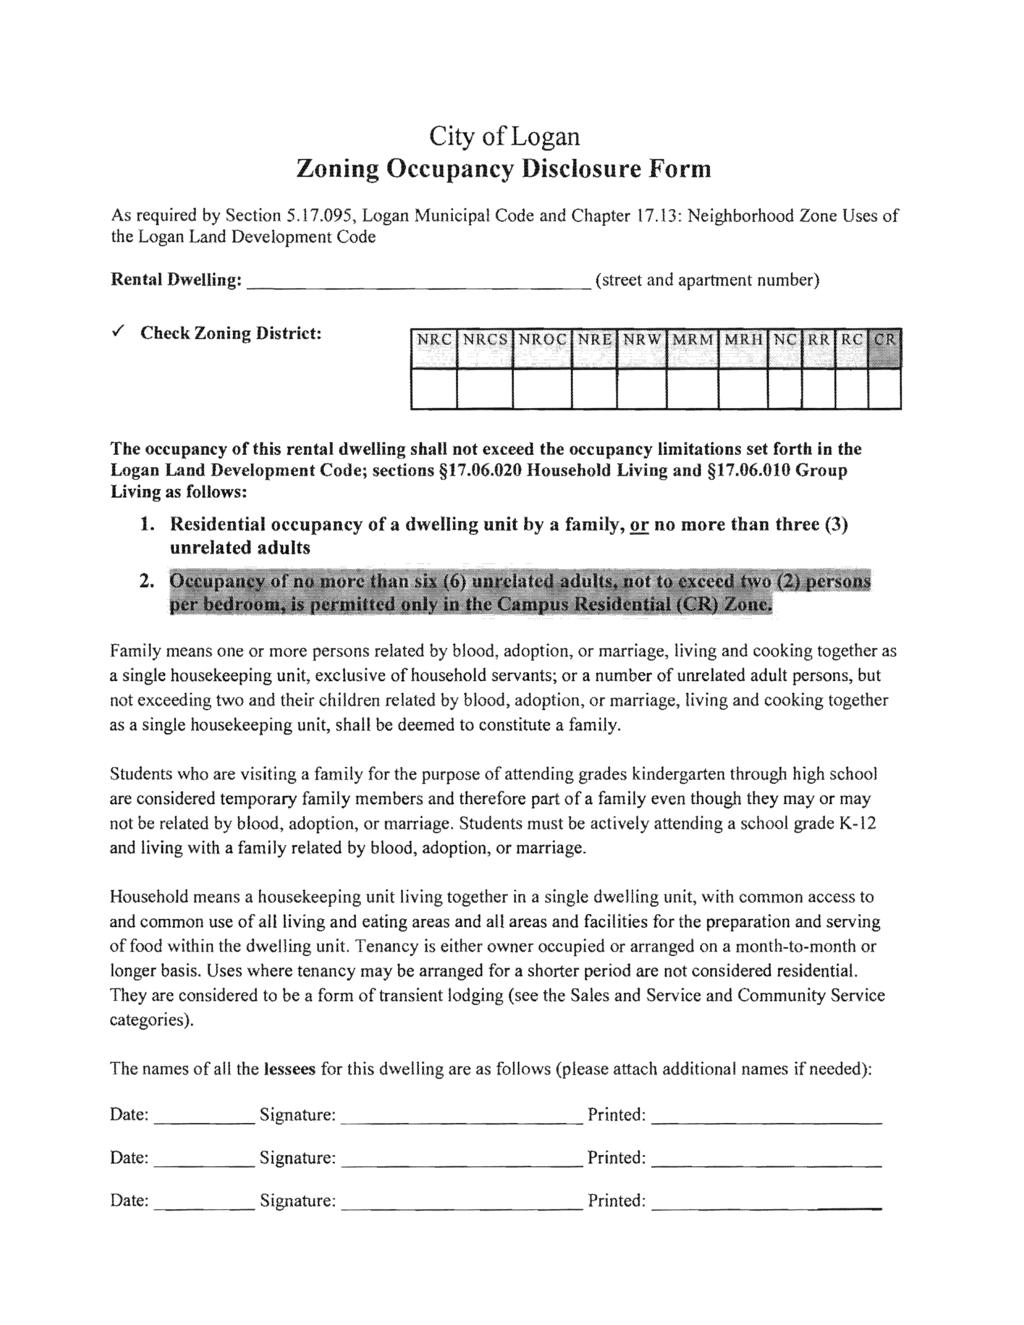 City of Logan Zoning Occupancy Disclosure Form As required by Section 5.17.095, Logan Municipal Code and Chapter 17.